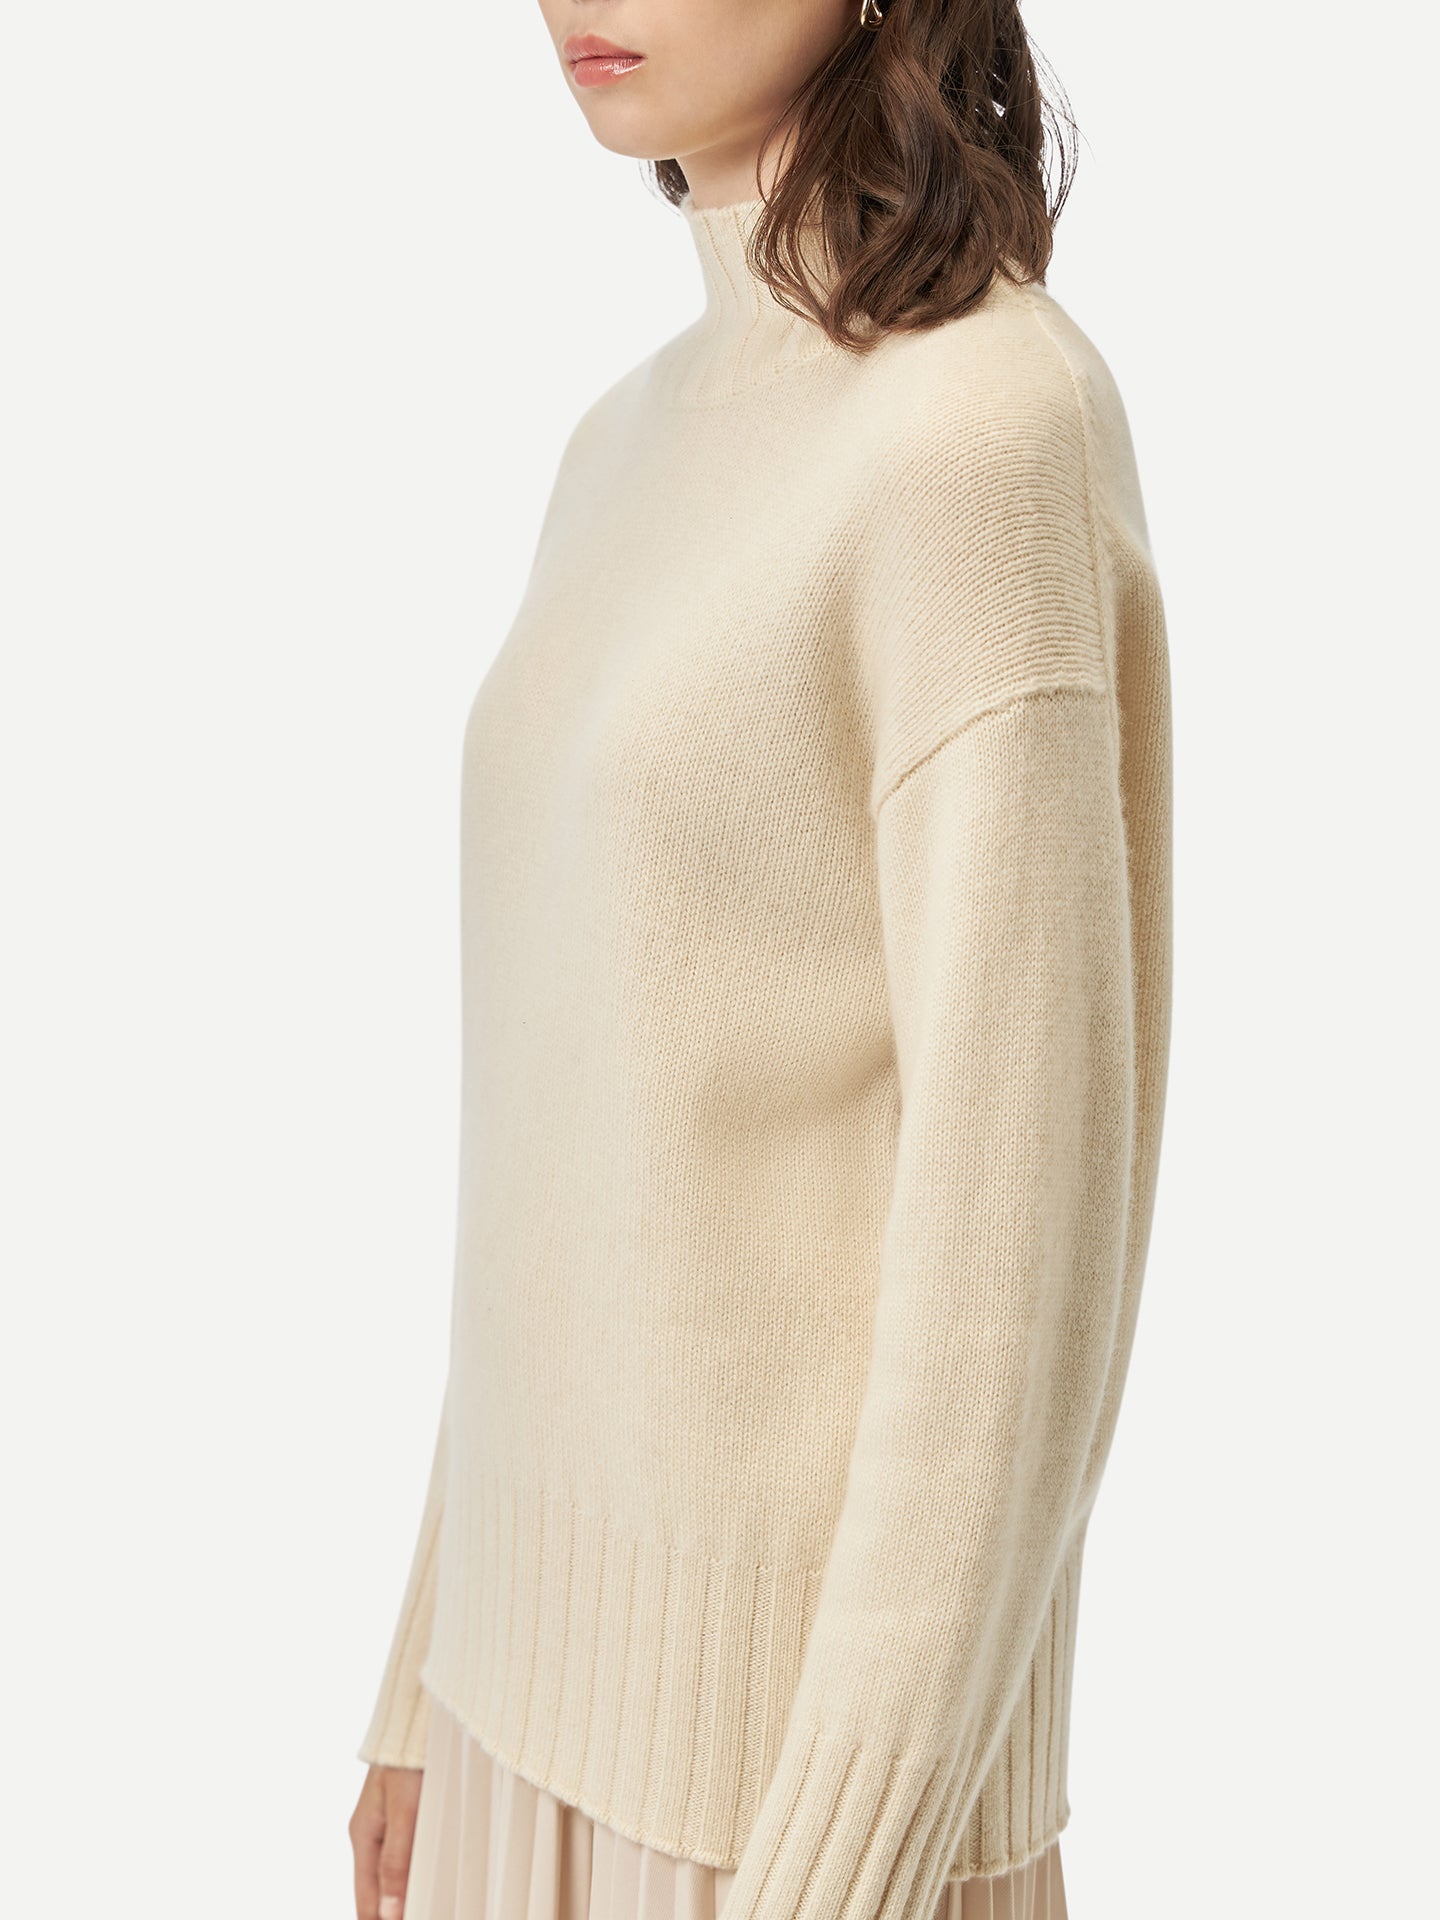 Women's Organic Colour Relaxed-Fit Cashmere Turtleneck Off White - Gobi Cashmere